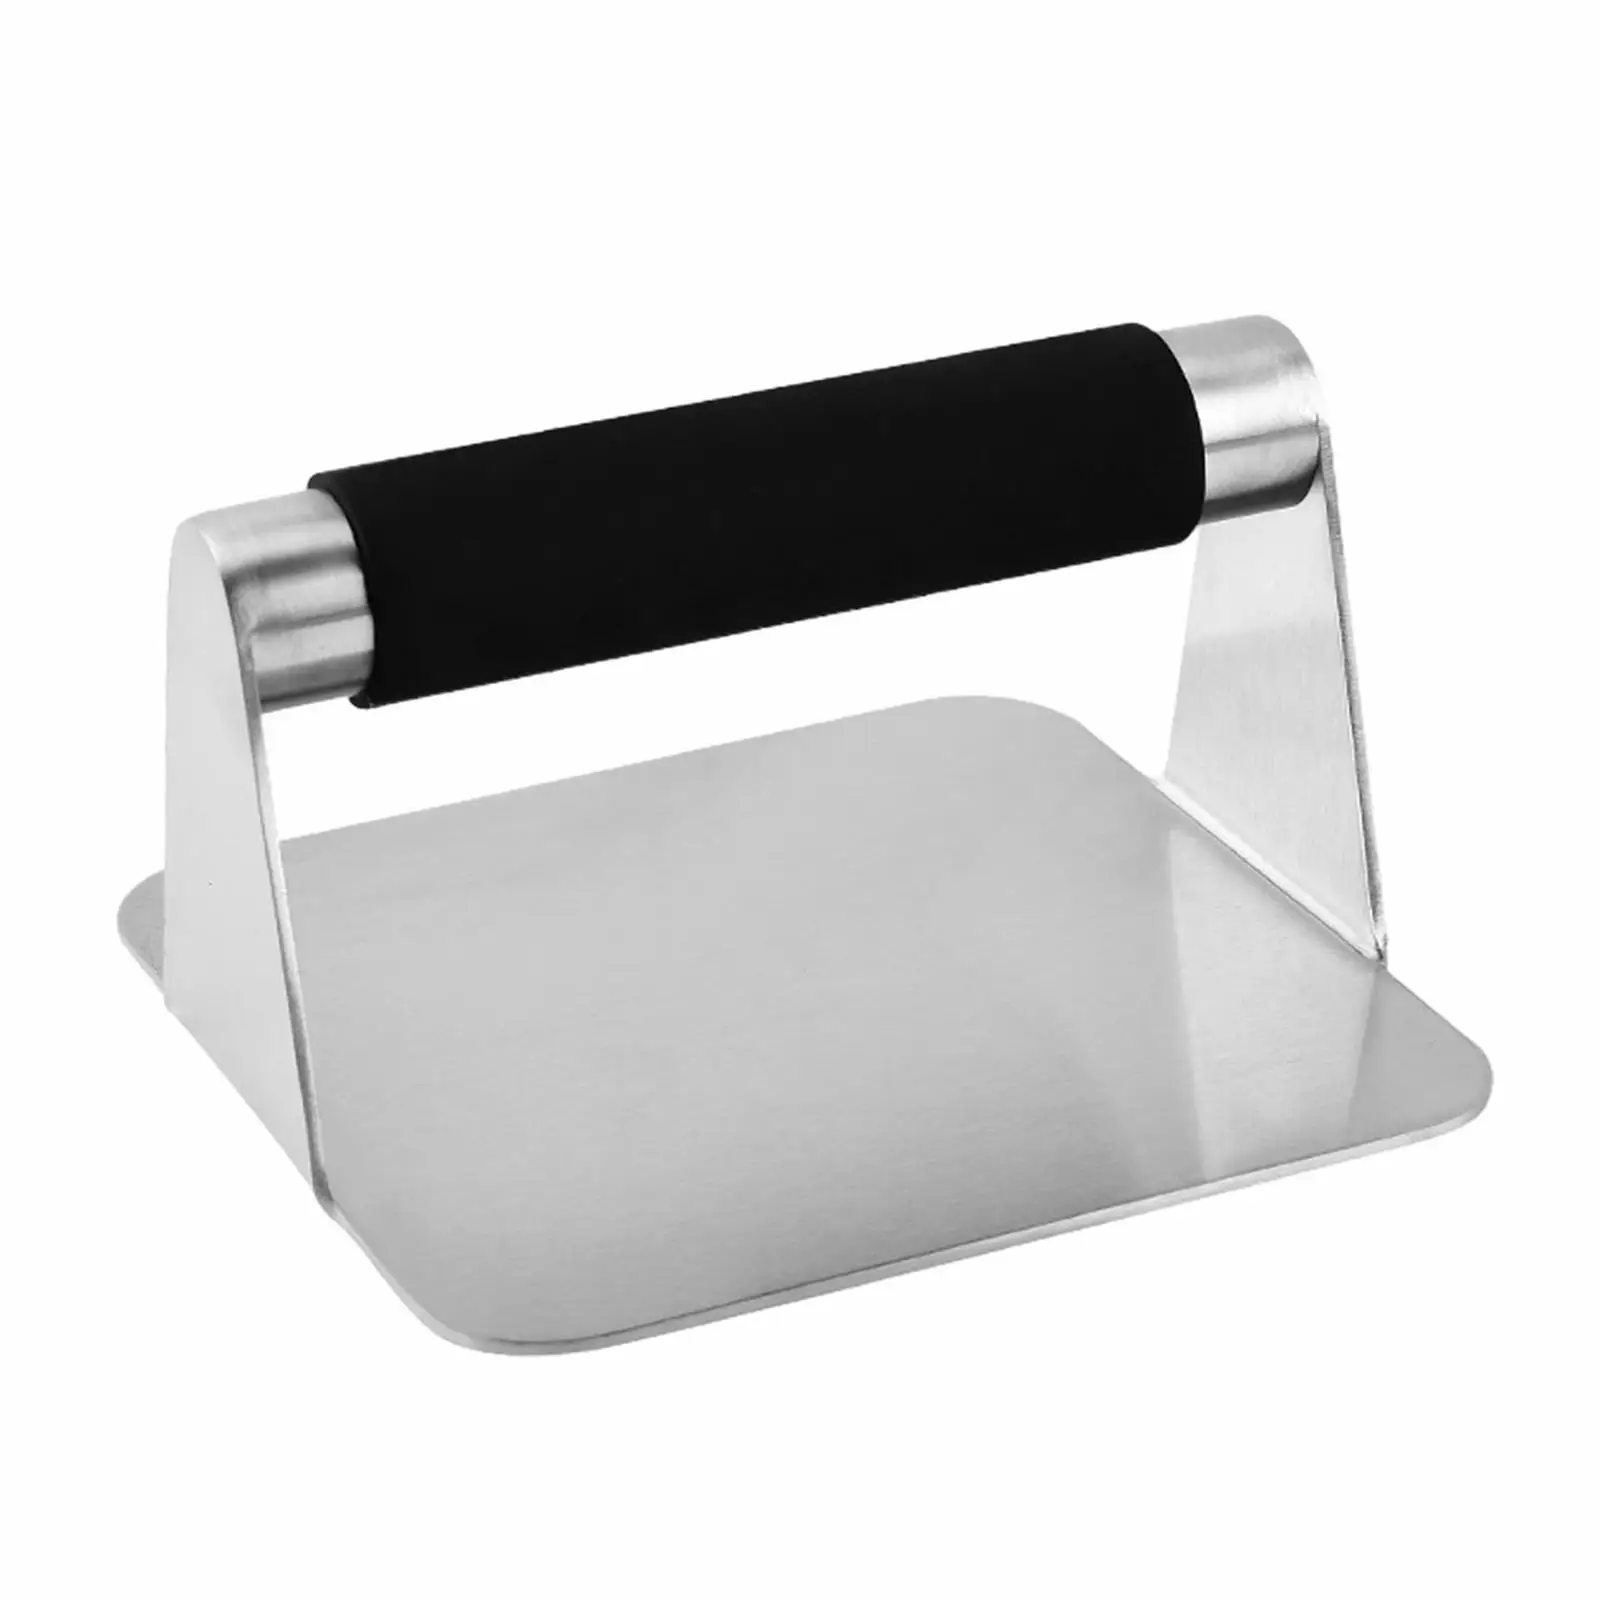 Stainless Steel Burger Press Manual Kitchen Accessories Smooth Grill Press Burger Smasher for Sandwich Grill Steaks Kitchen Home